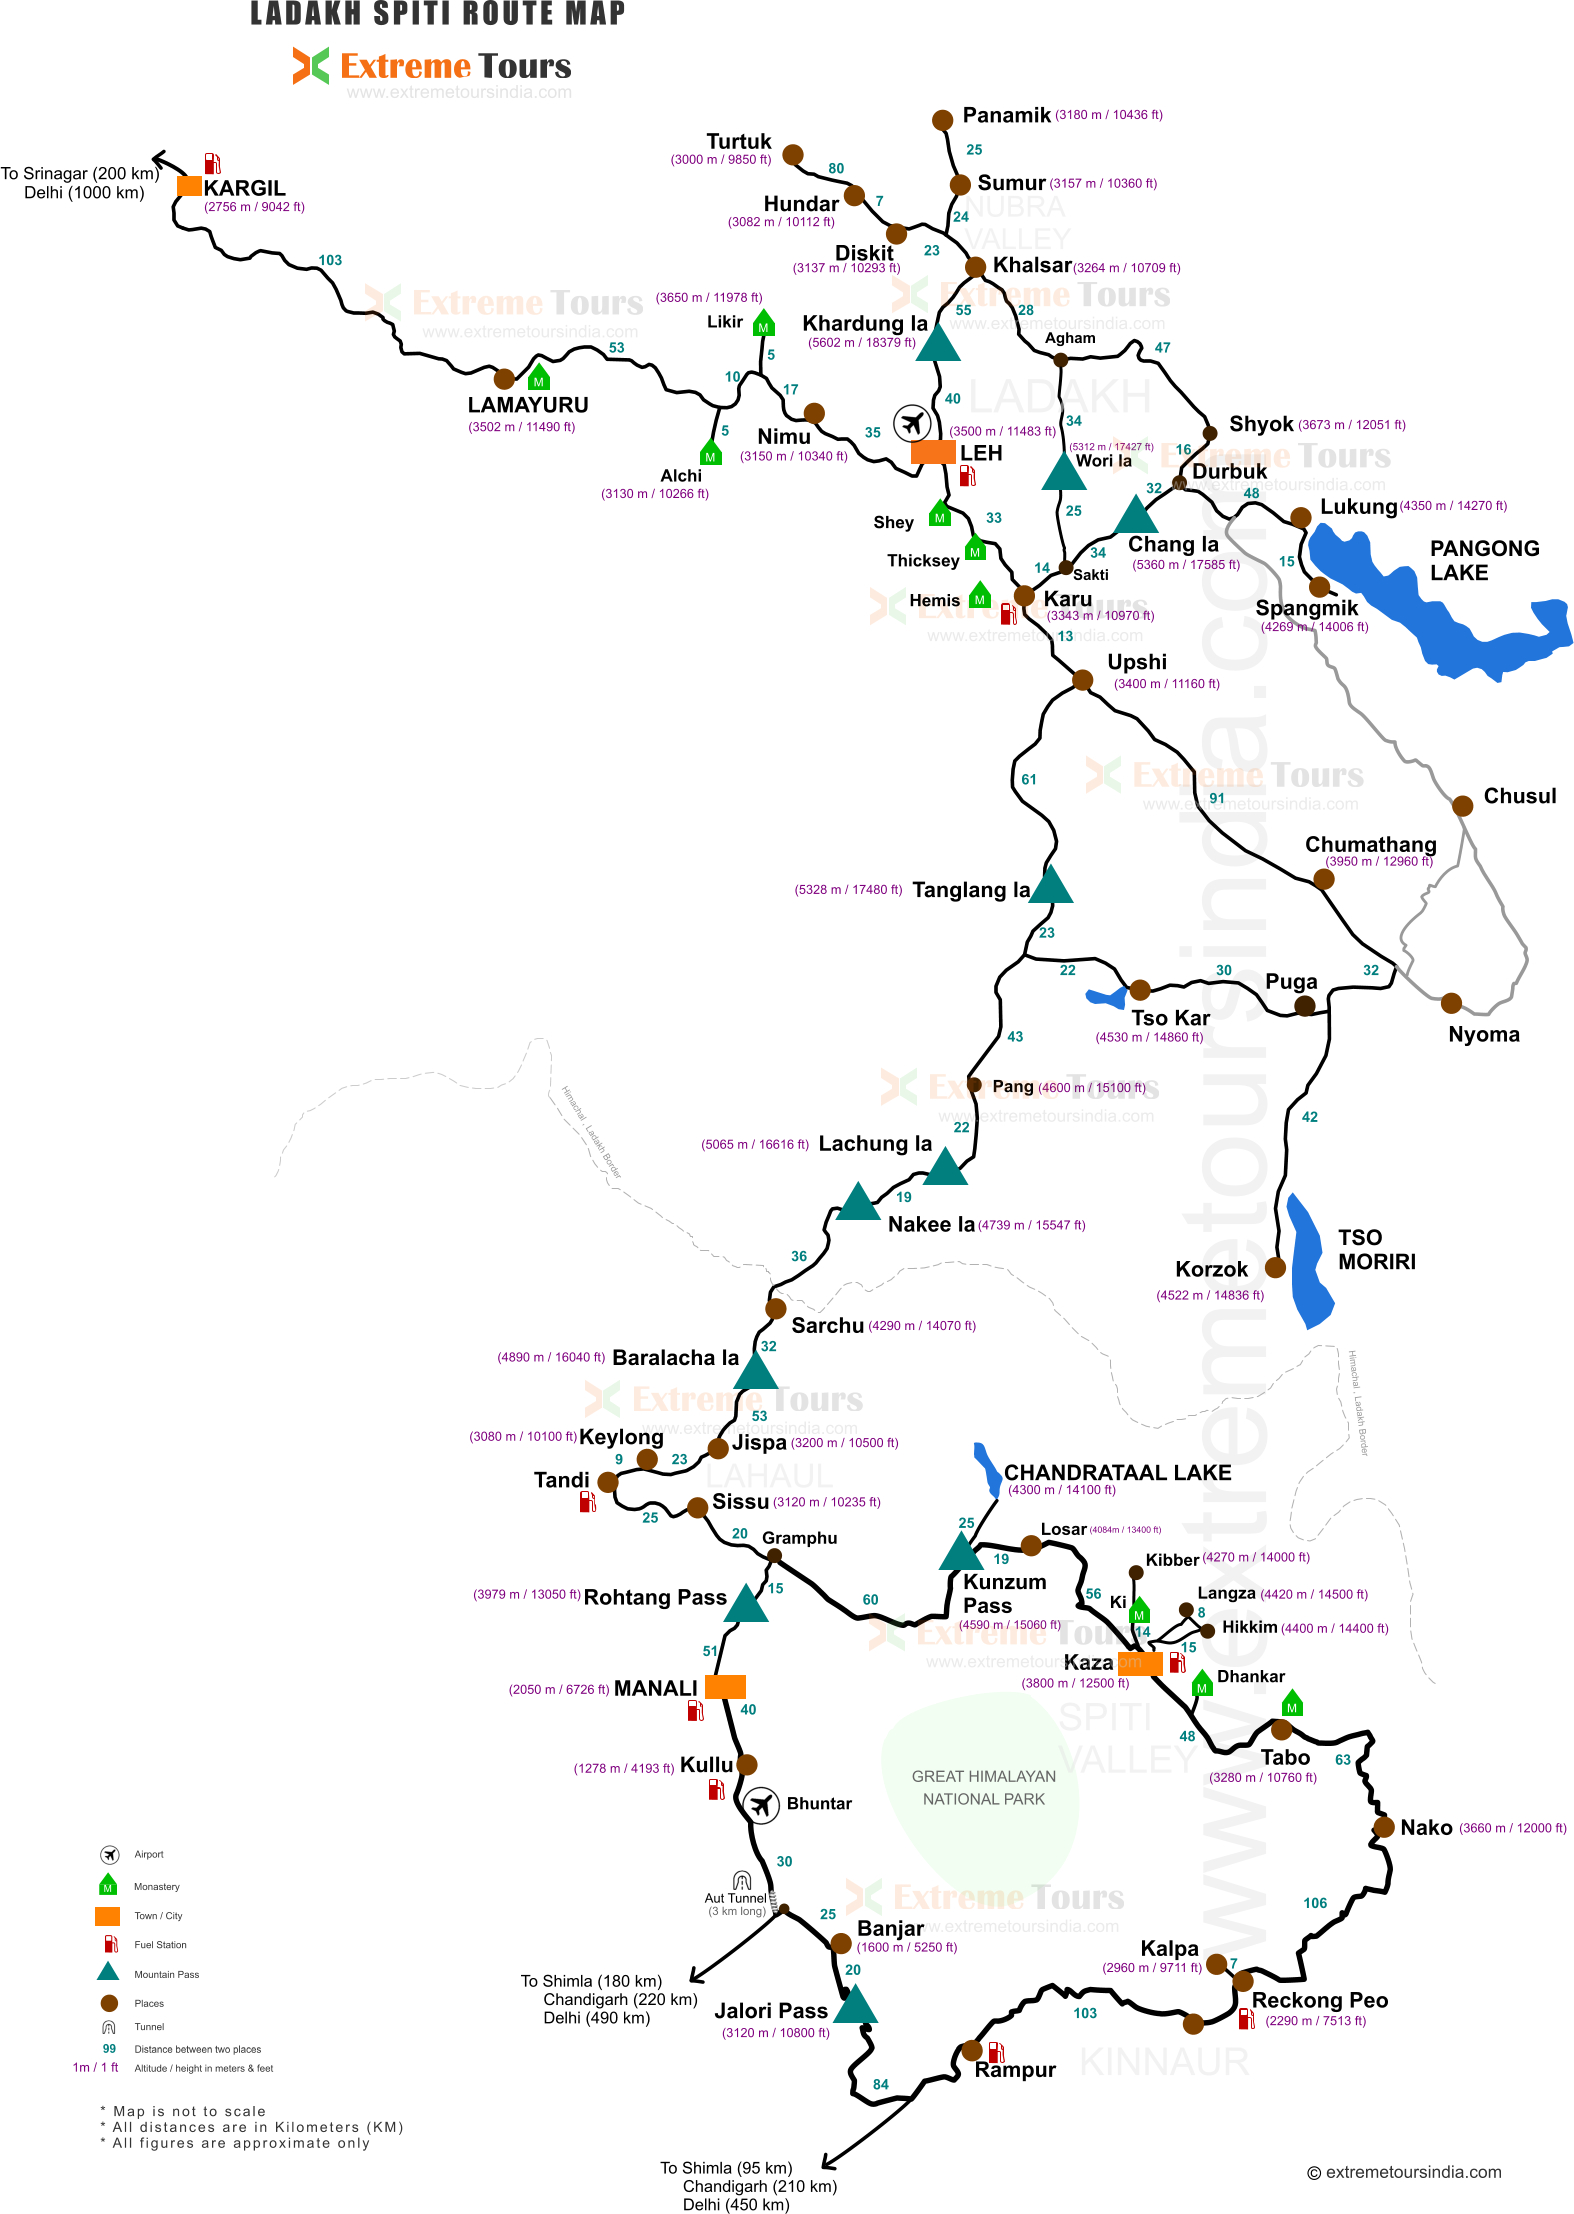 Detailed Route Map for Road Trip to Ladakh or Spiti